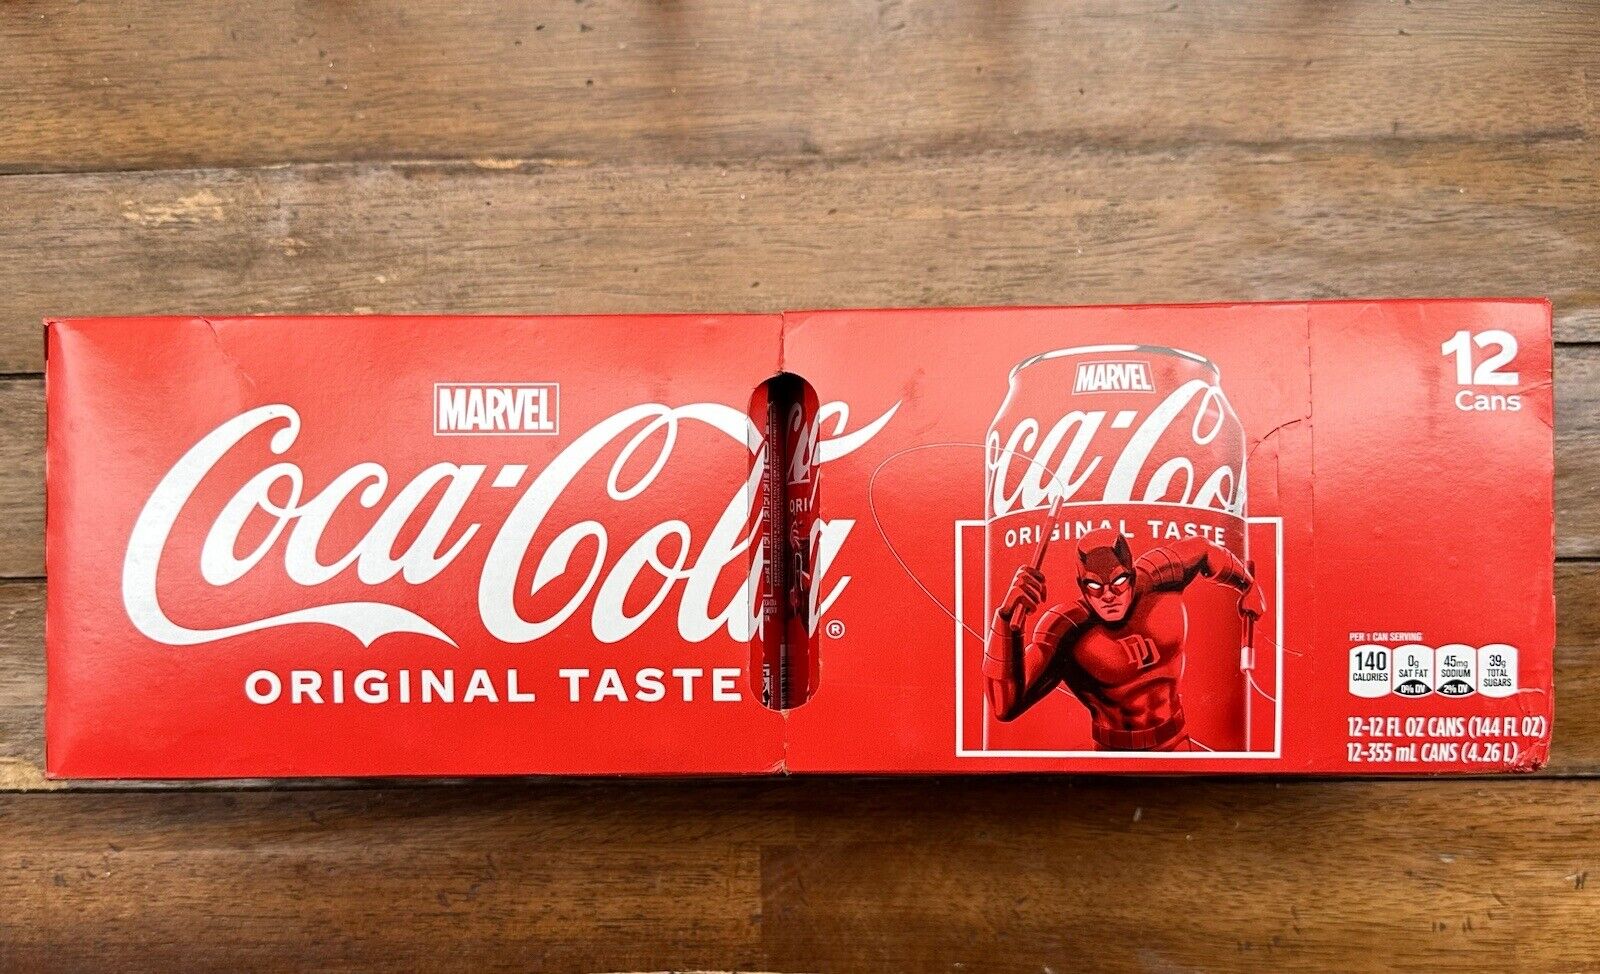 LIMITED EDITION Marvel Coke (Coca-Cola) SEALED 12 Pack of 12 Oz Cans